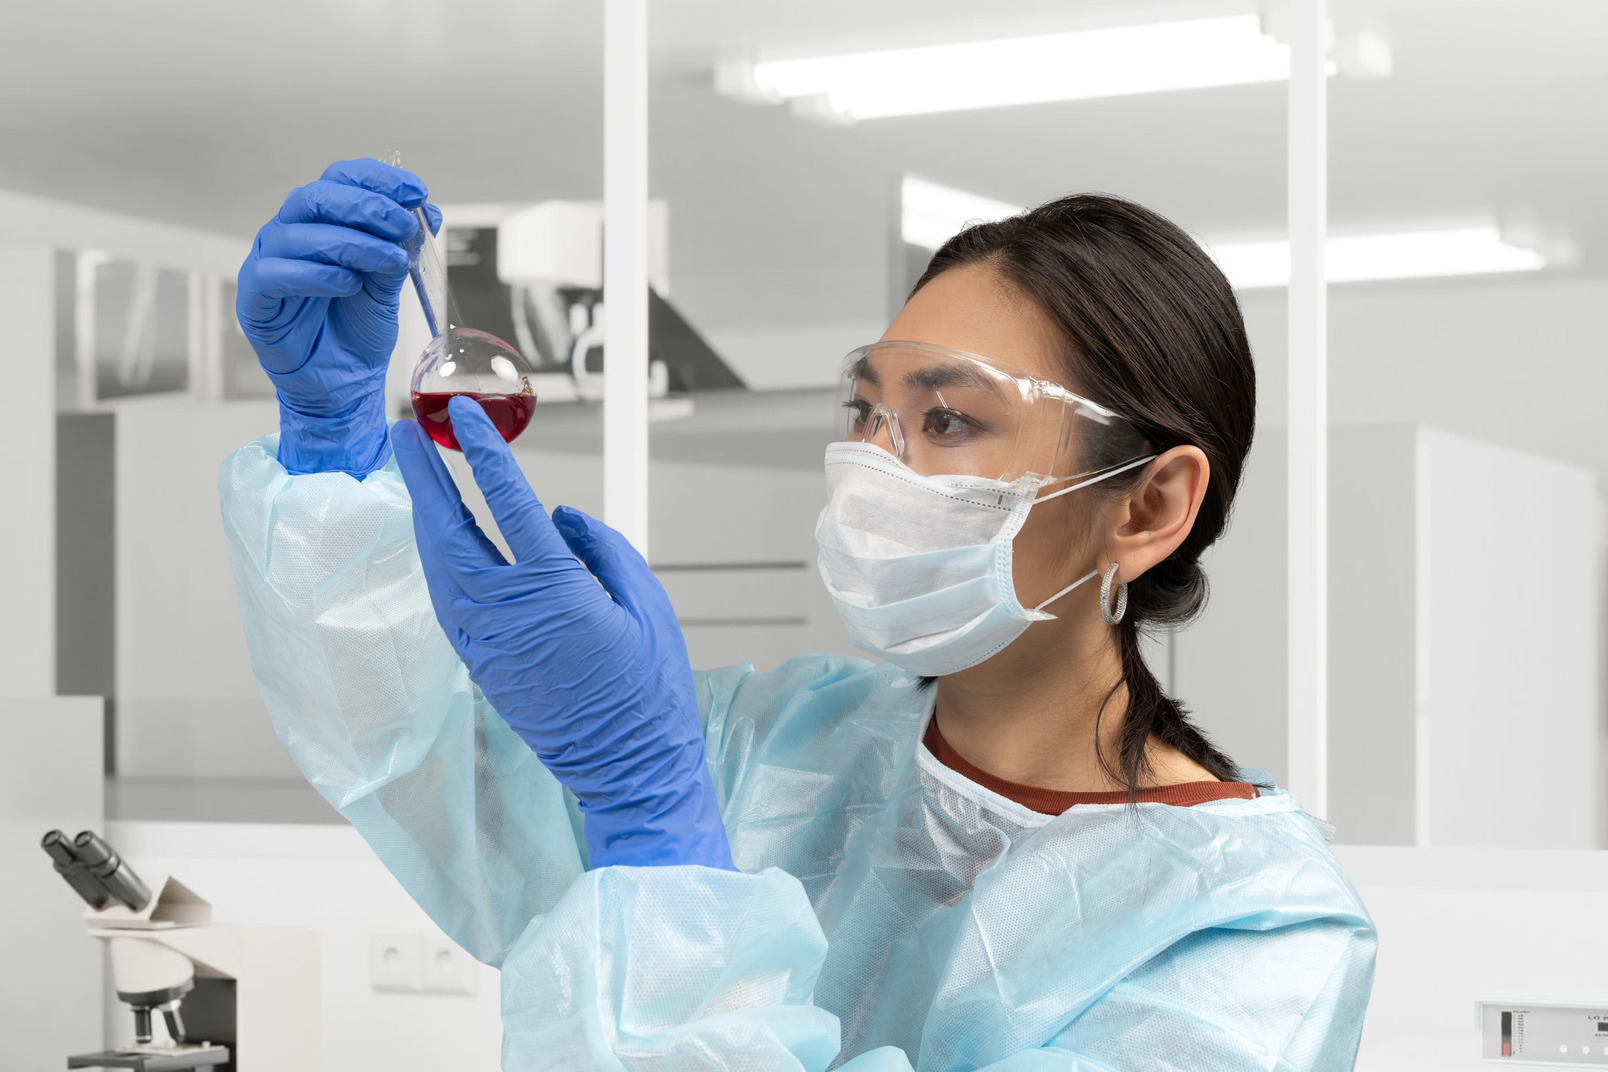 Portrait of a female scientist working in a laboratory